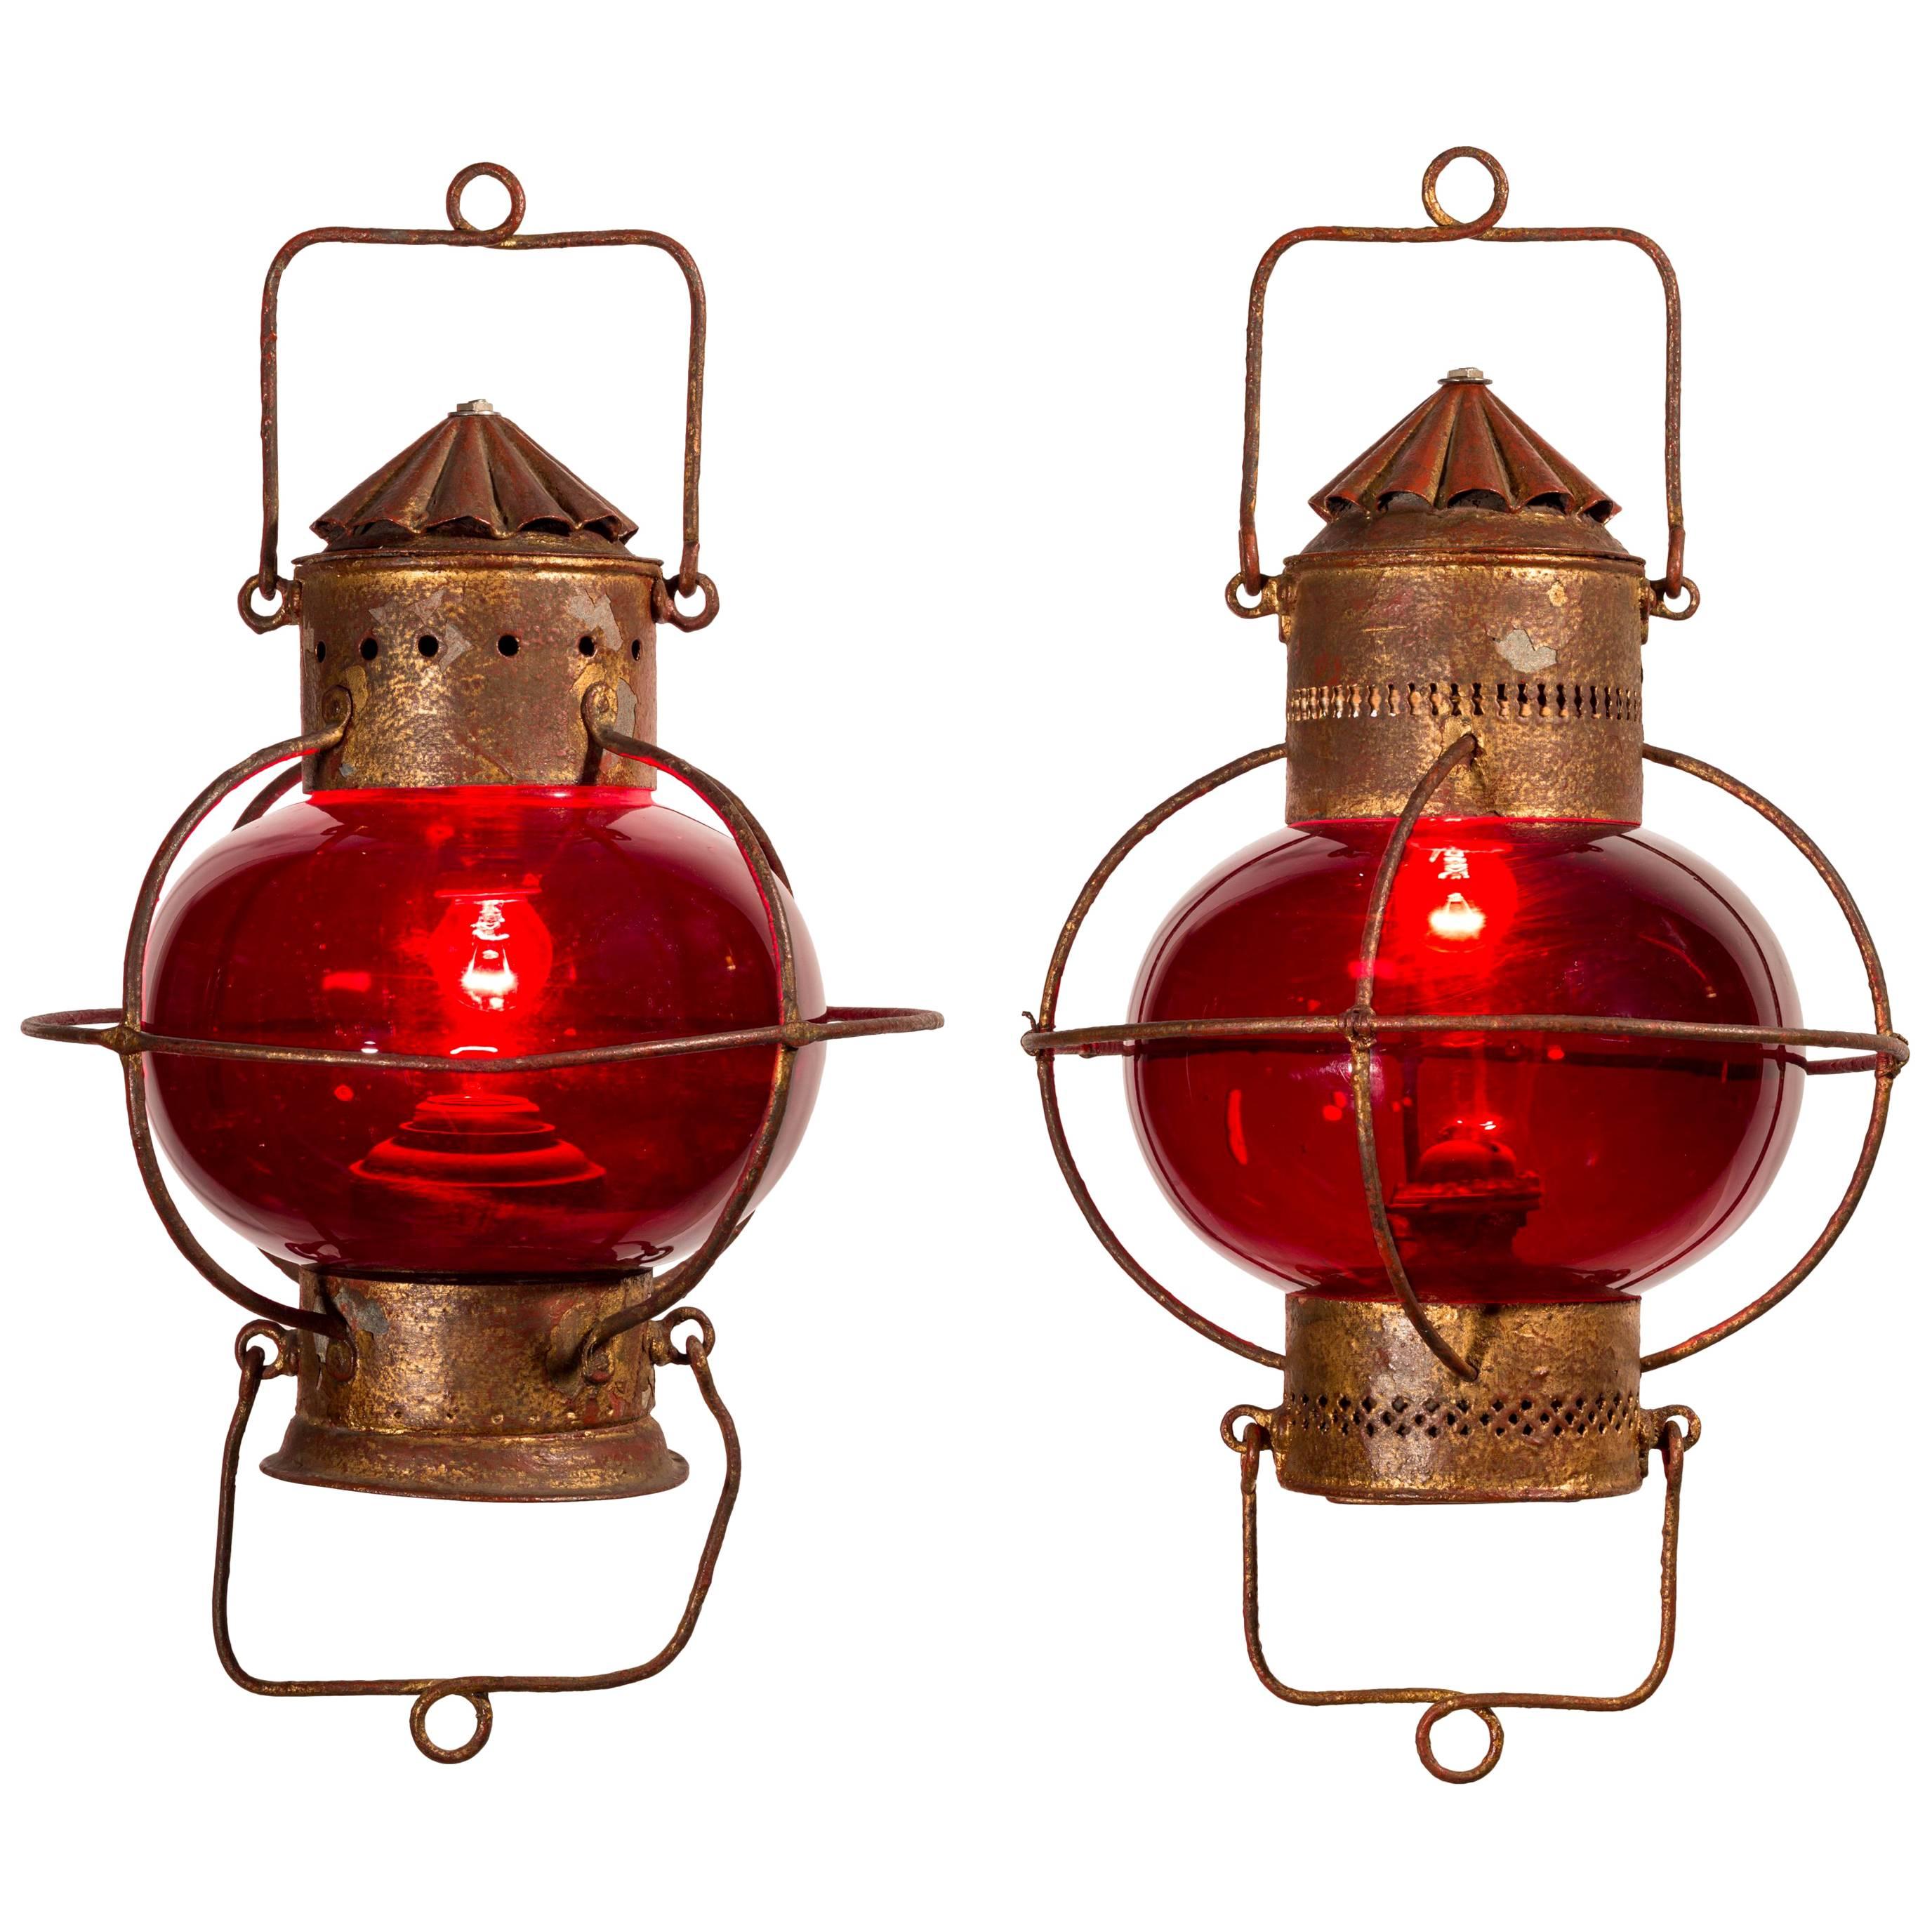 Pair of 19th Century Ship / Nautical Oil Lamps with Red Globes Electrified